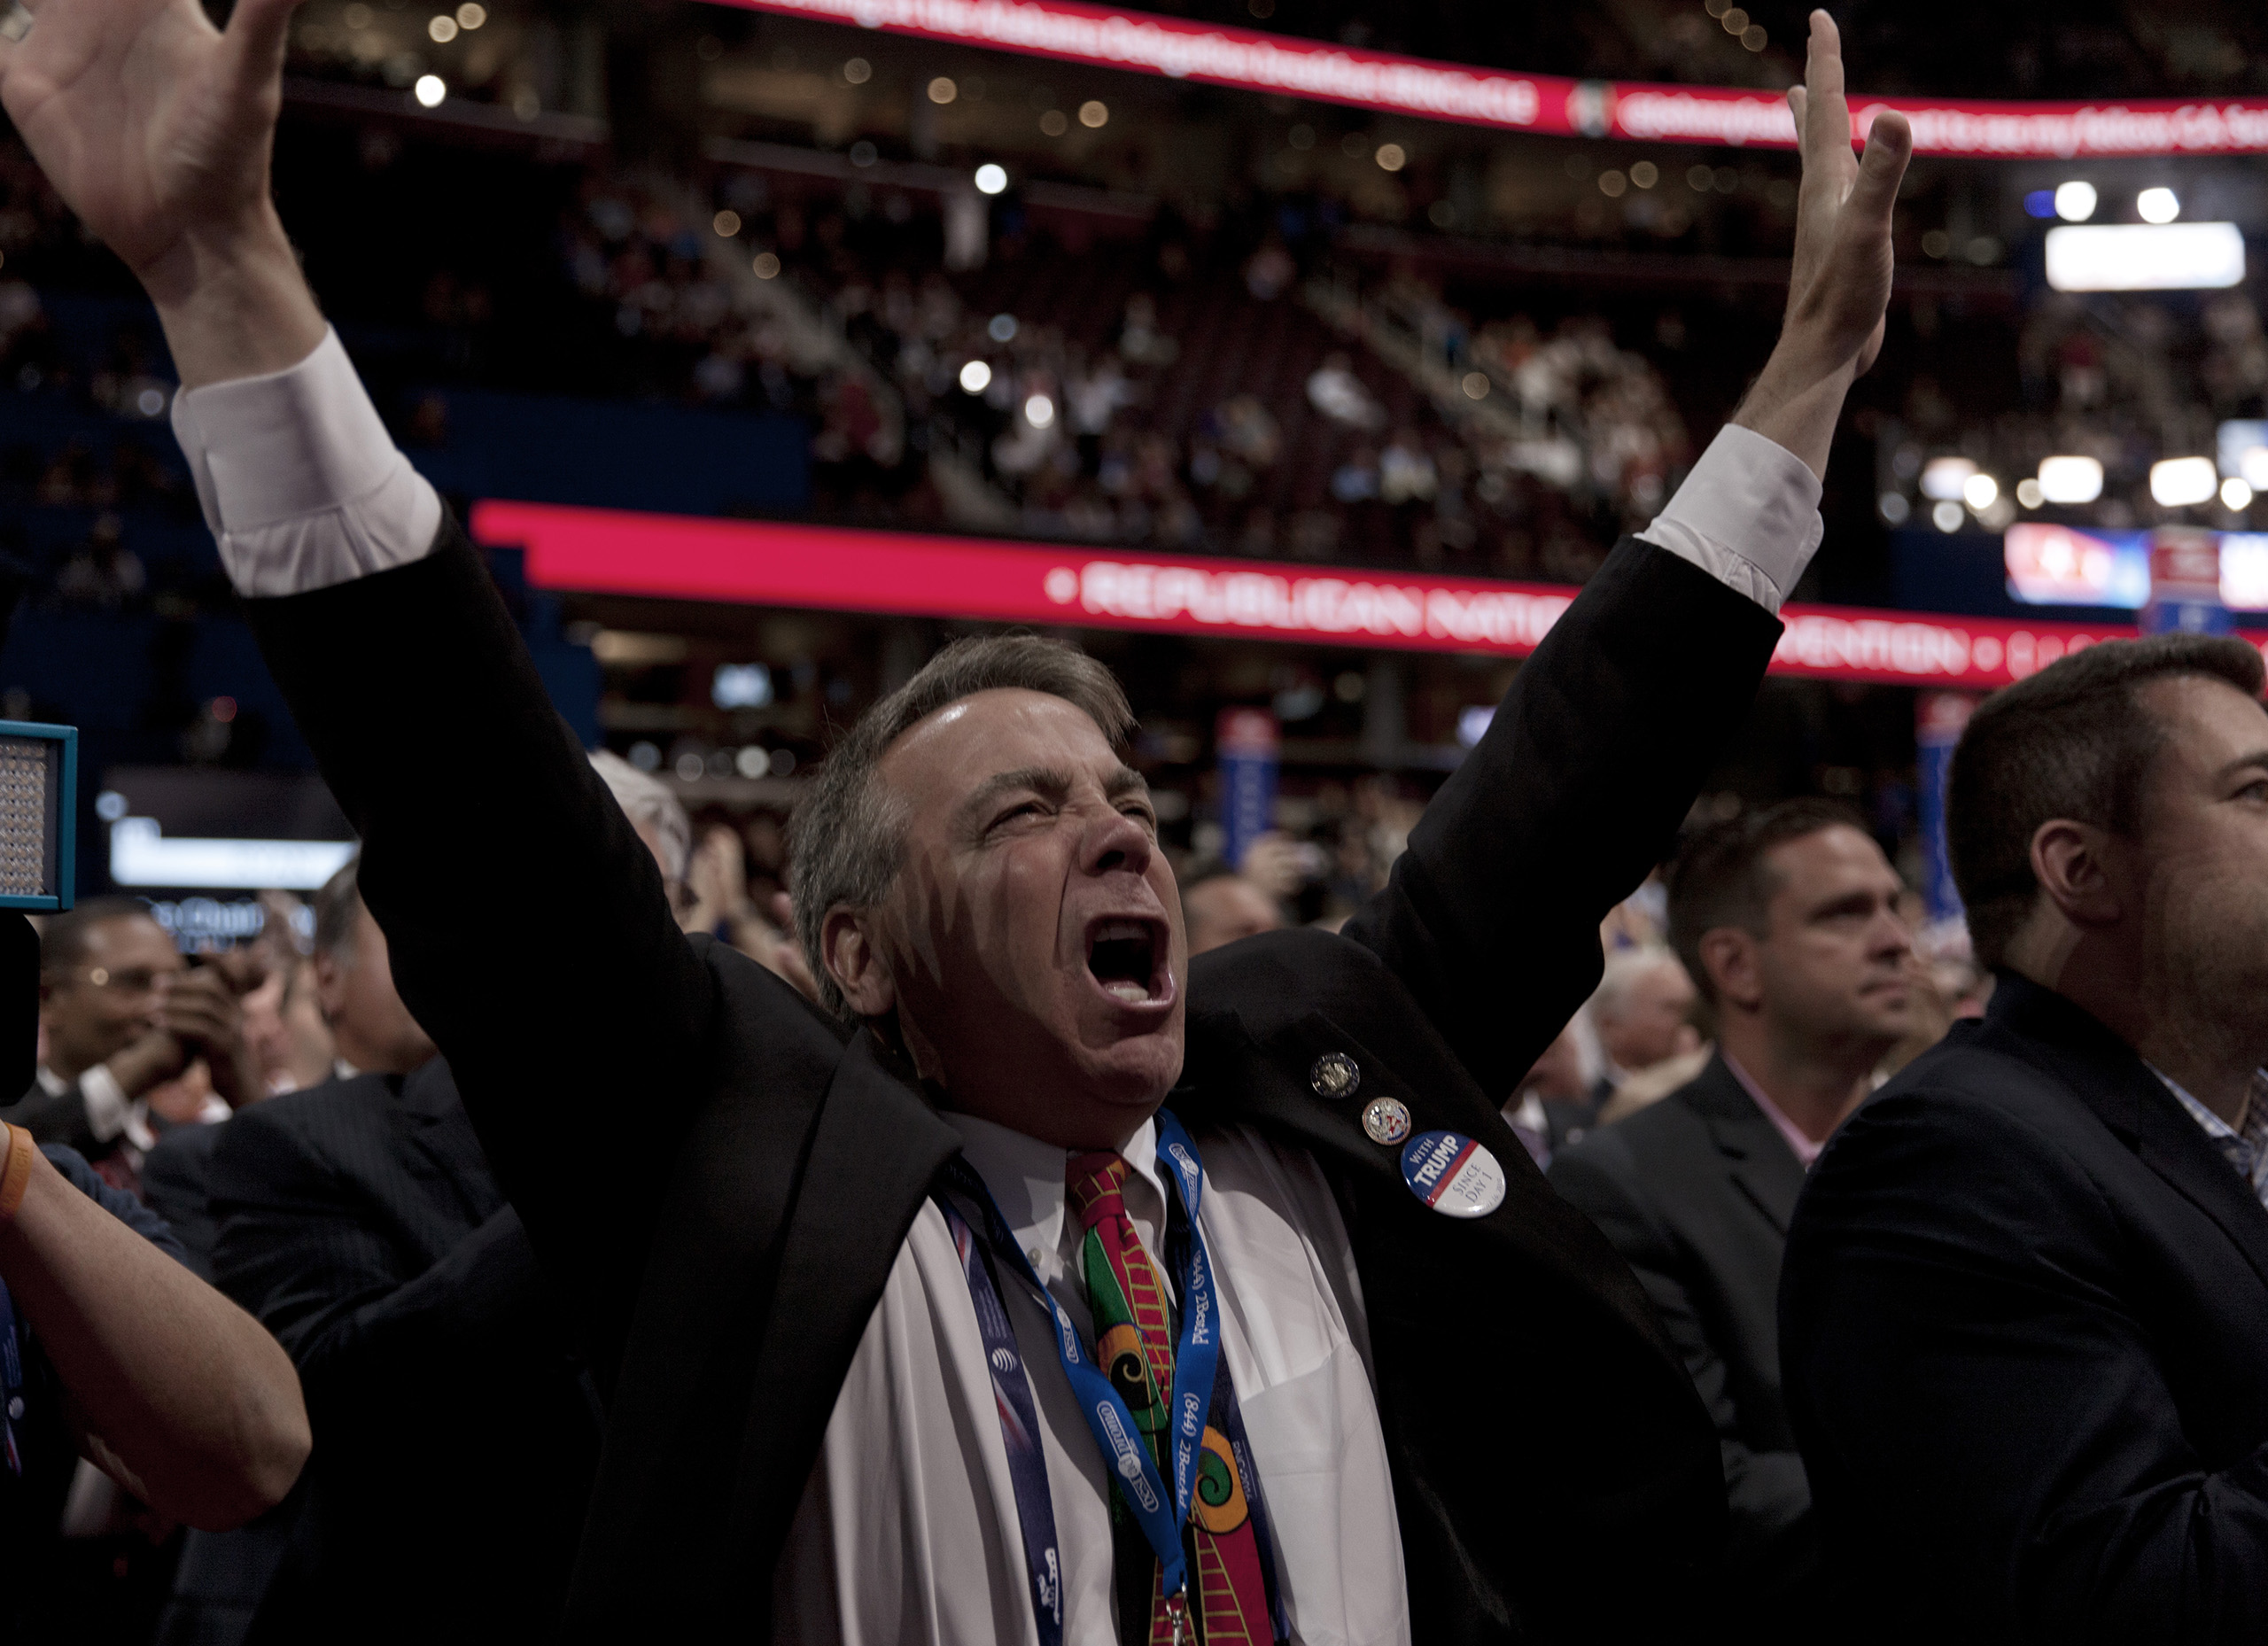 Attendees cheers at the Republican National Convention on July 19, 2016 at the Quicken Loans Arena in Cleveland.